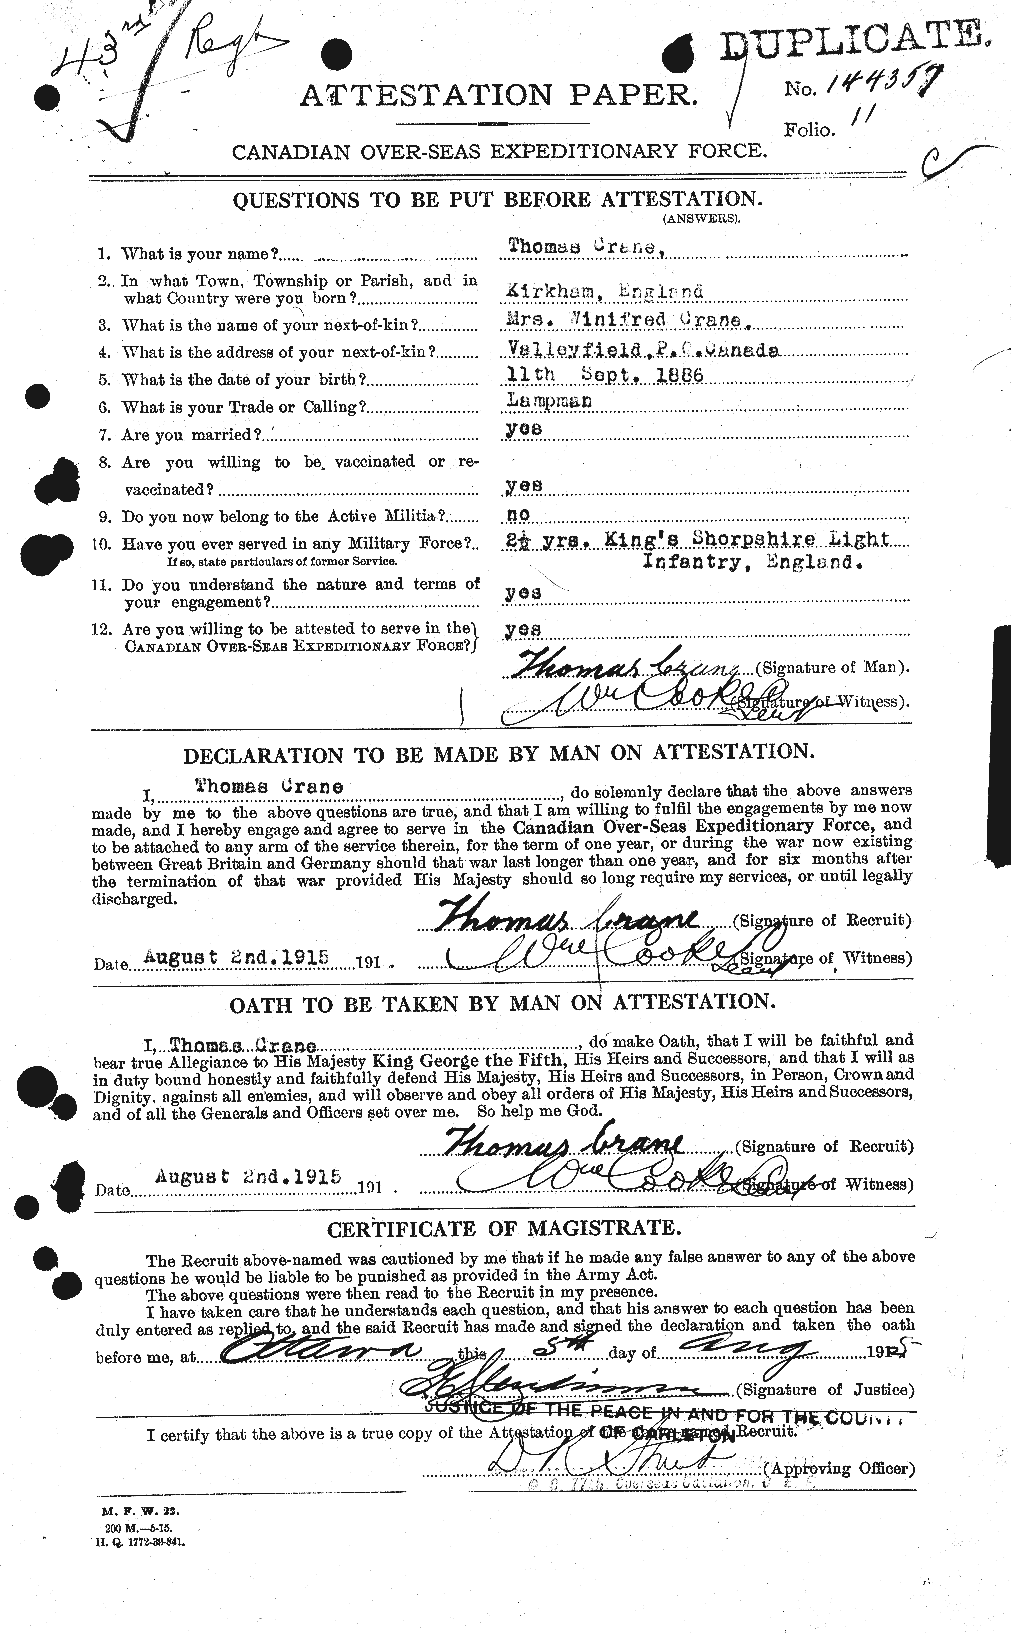 Personnel Records of the First World War - CEF 061745a